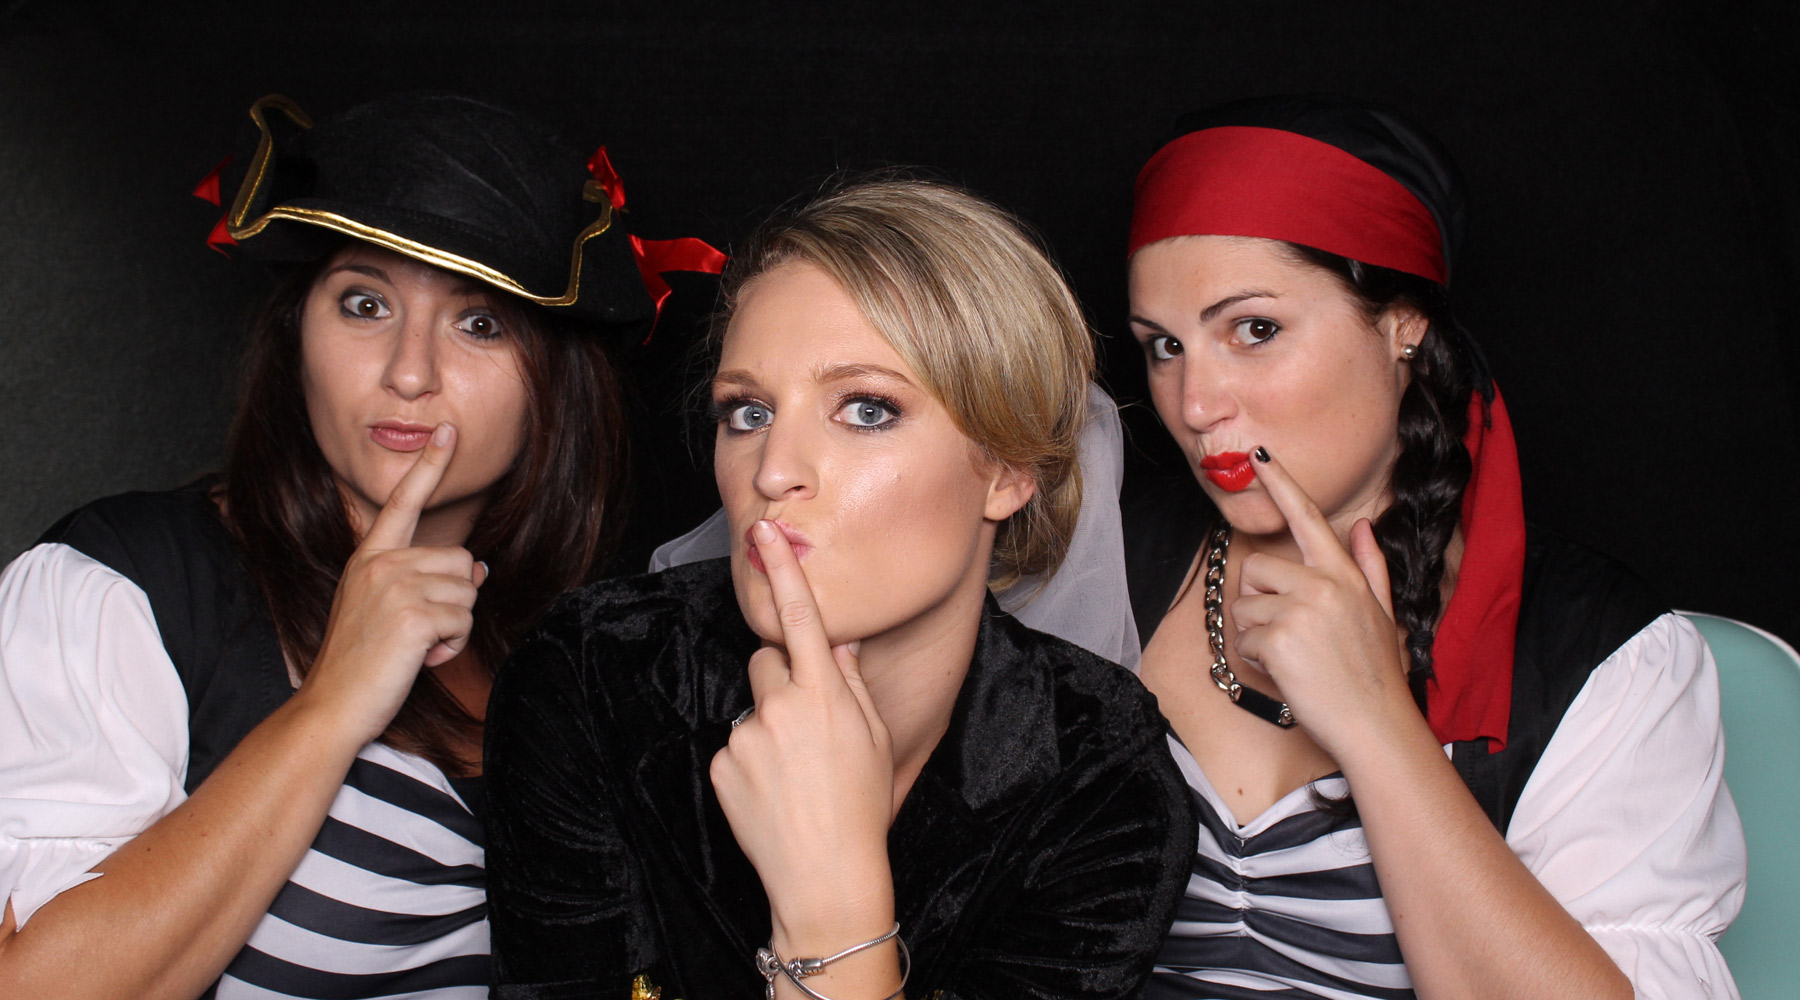 hens party ideas, photobooth hire private party, auckland hens party, photo booth hire auckland, pirate party ideas